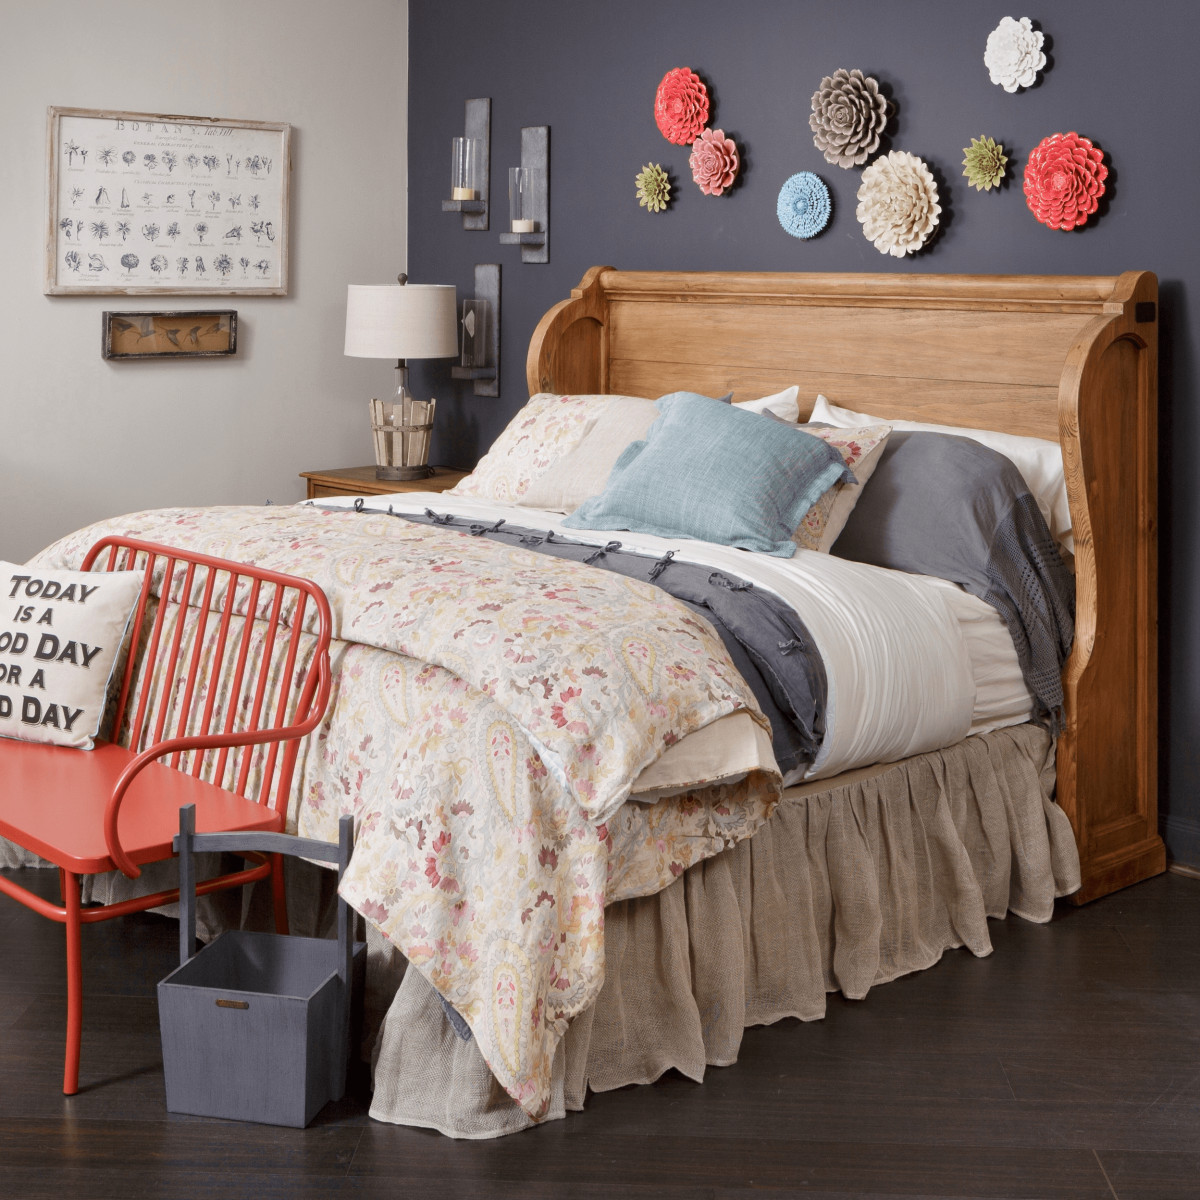 Mix and Match Bedroom Furniture Lovely Hgtv Star S Furniture Collection Brings Fixer Upper Style to